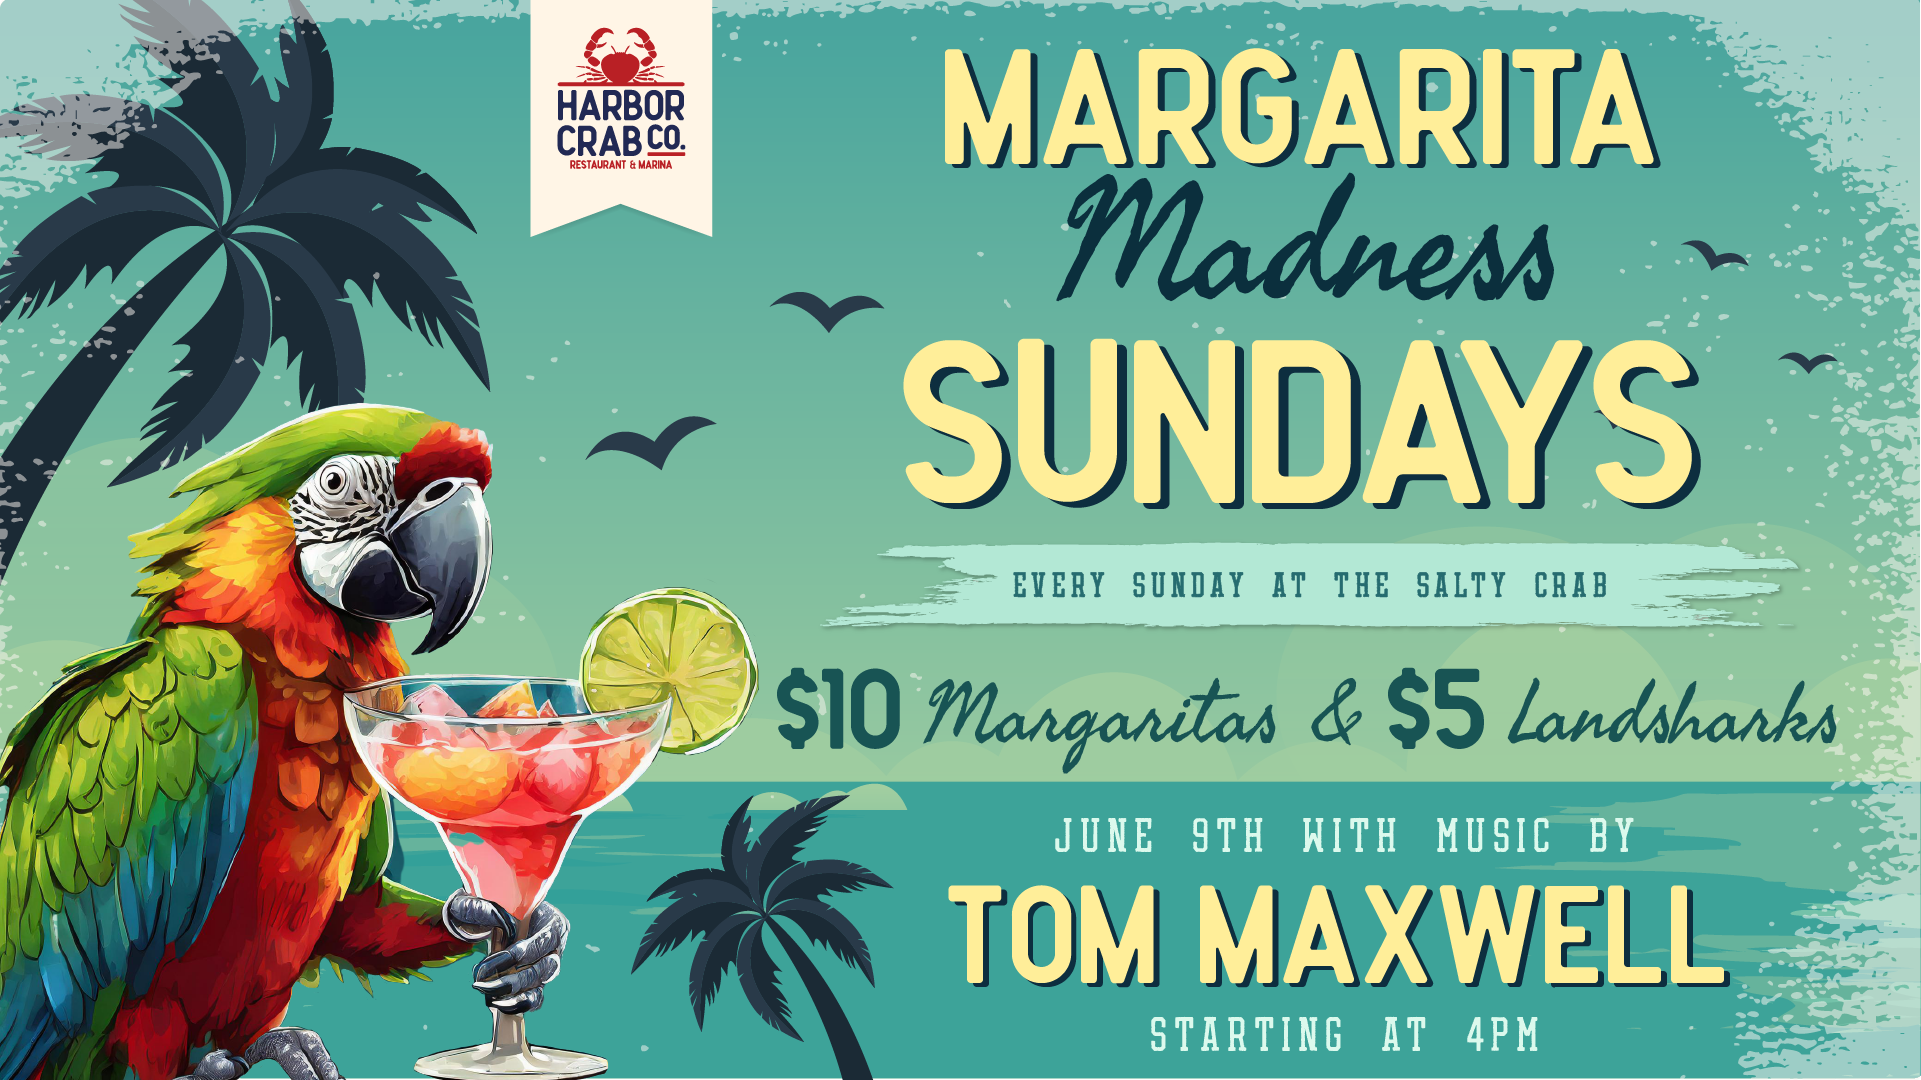 Margarita Madness Sundays with $10 margaritas, $5 Landsharks, and Tom Maxwell on June 9th at 4pm.